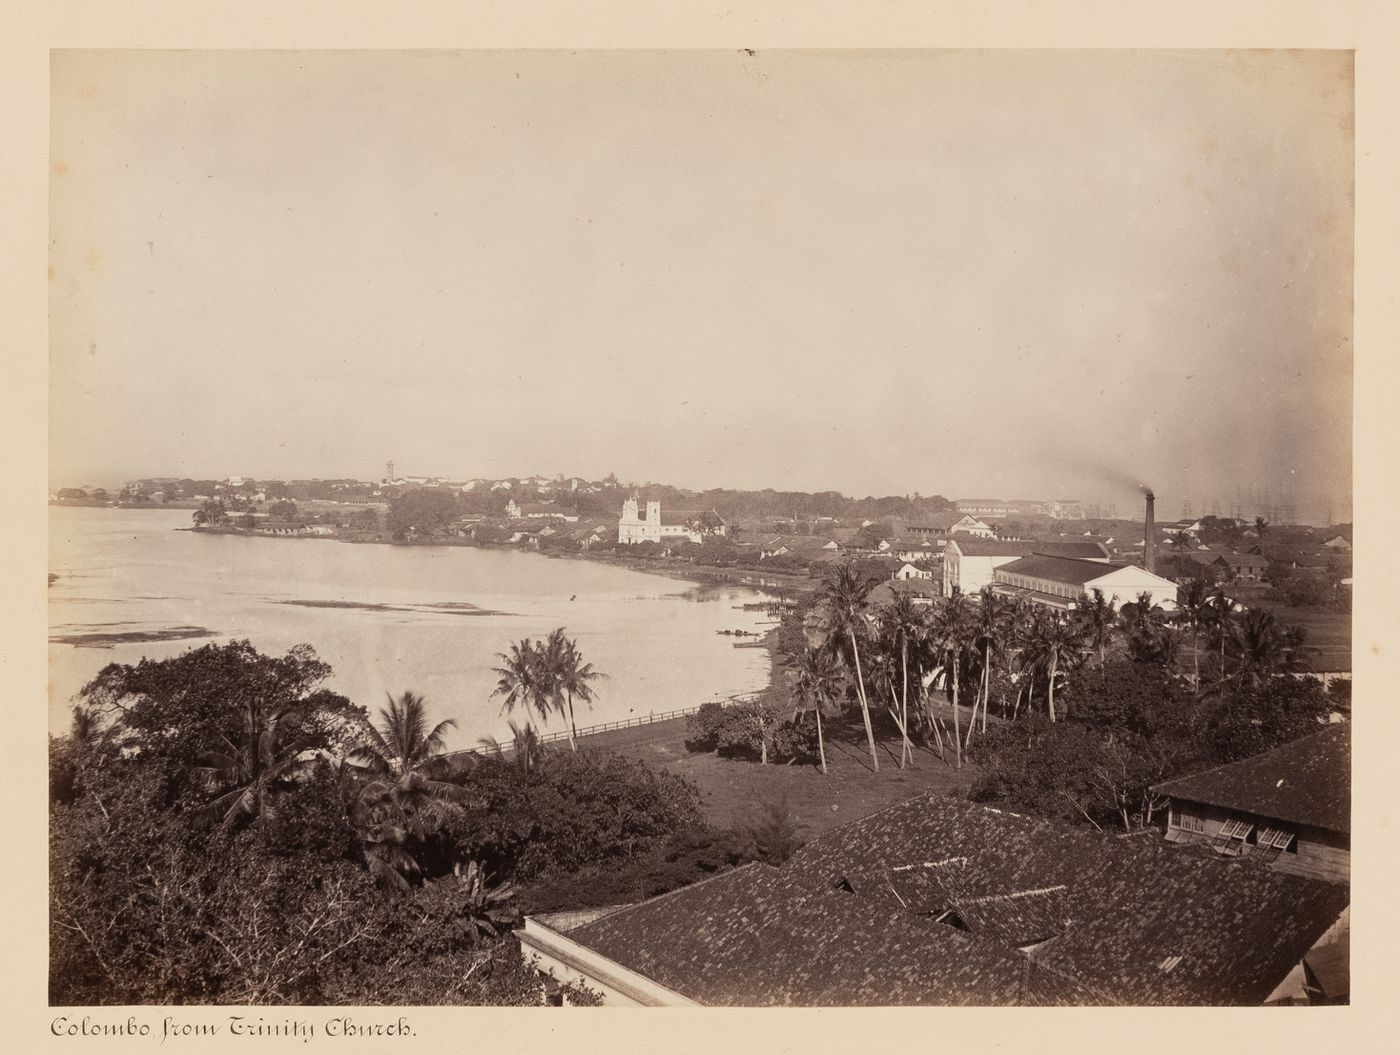 Panoramic view of Colombo showing Beira Lake and St. Philip's Church with the clock tower and lighthouse in the left background and the harbour in the right background, Colombo, Ceylon (now Sri Lanka)